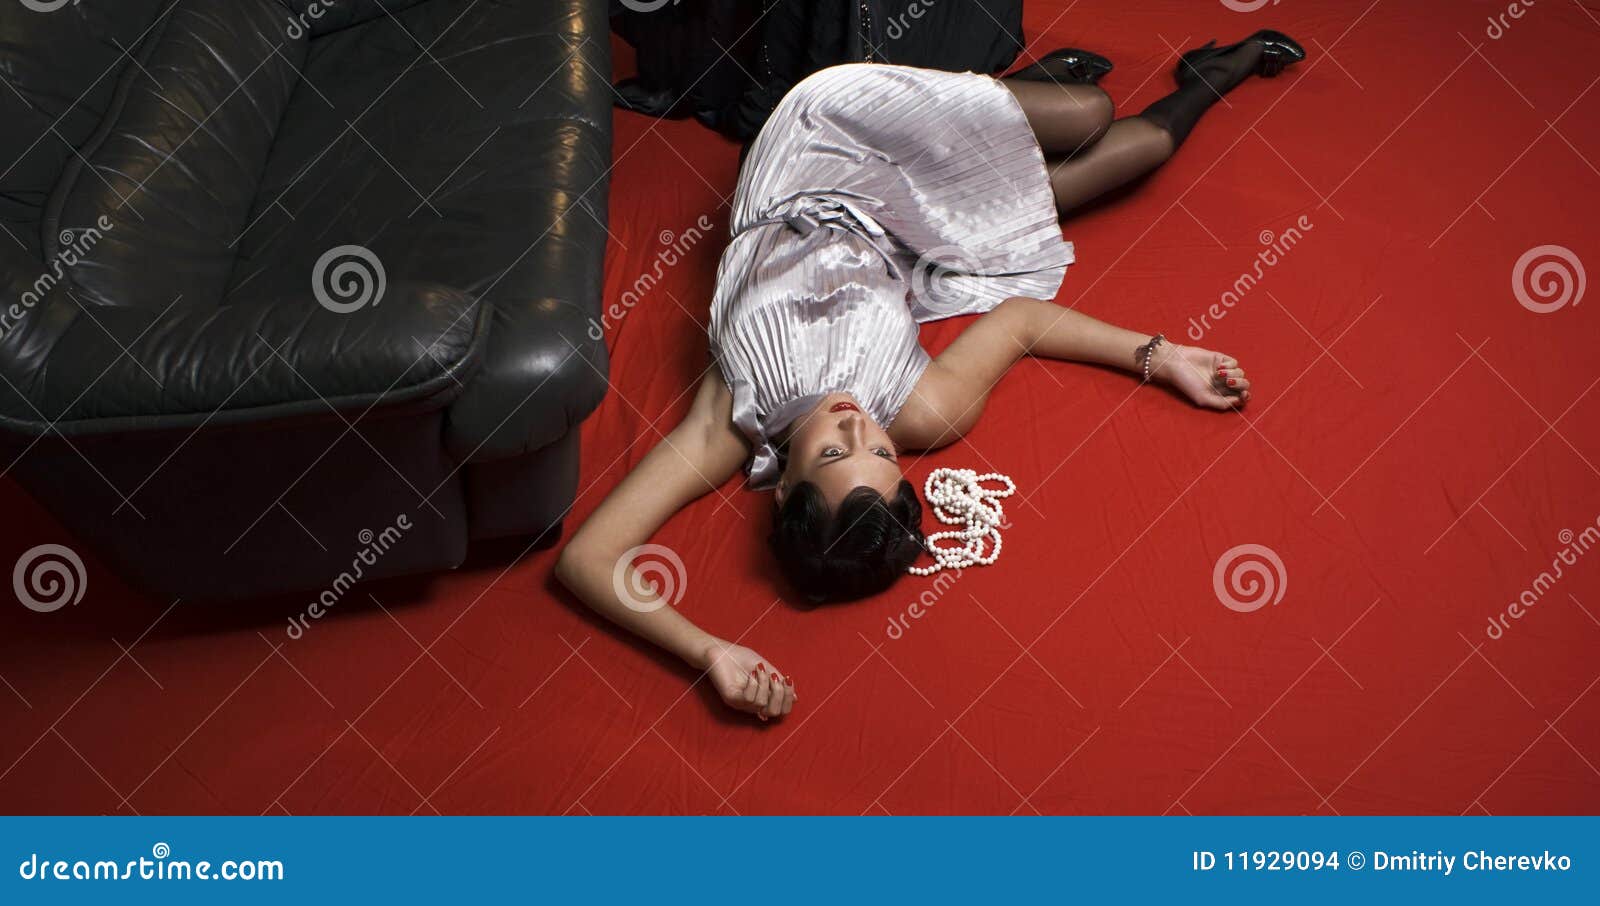 Dead Woman Lying On The Floor Stock Images - Image: 11929094